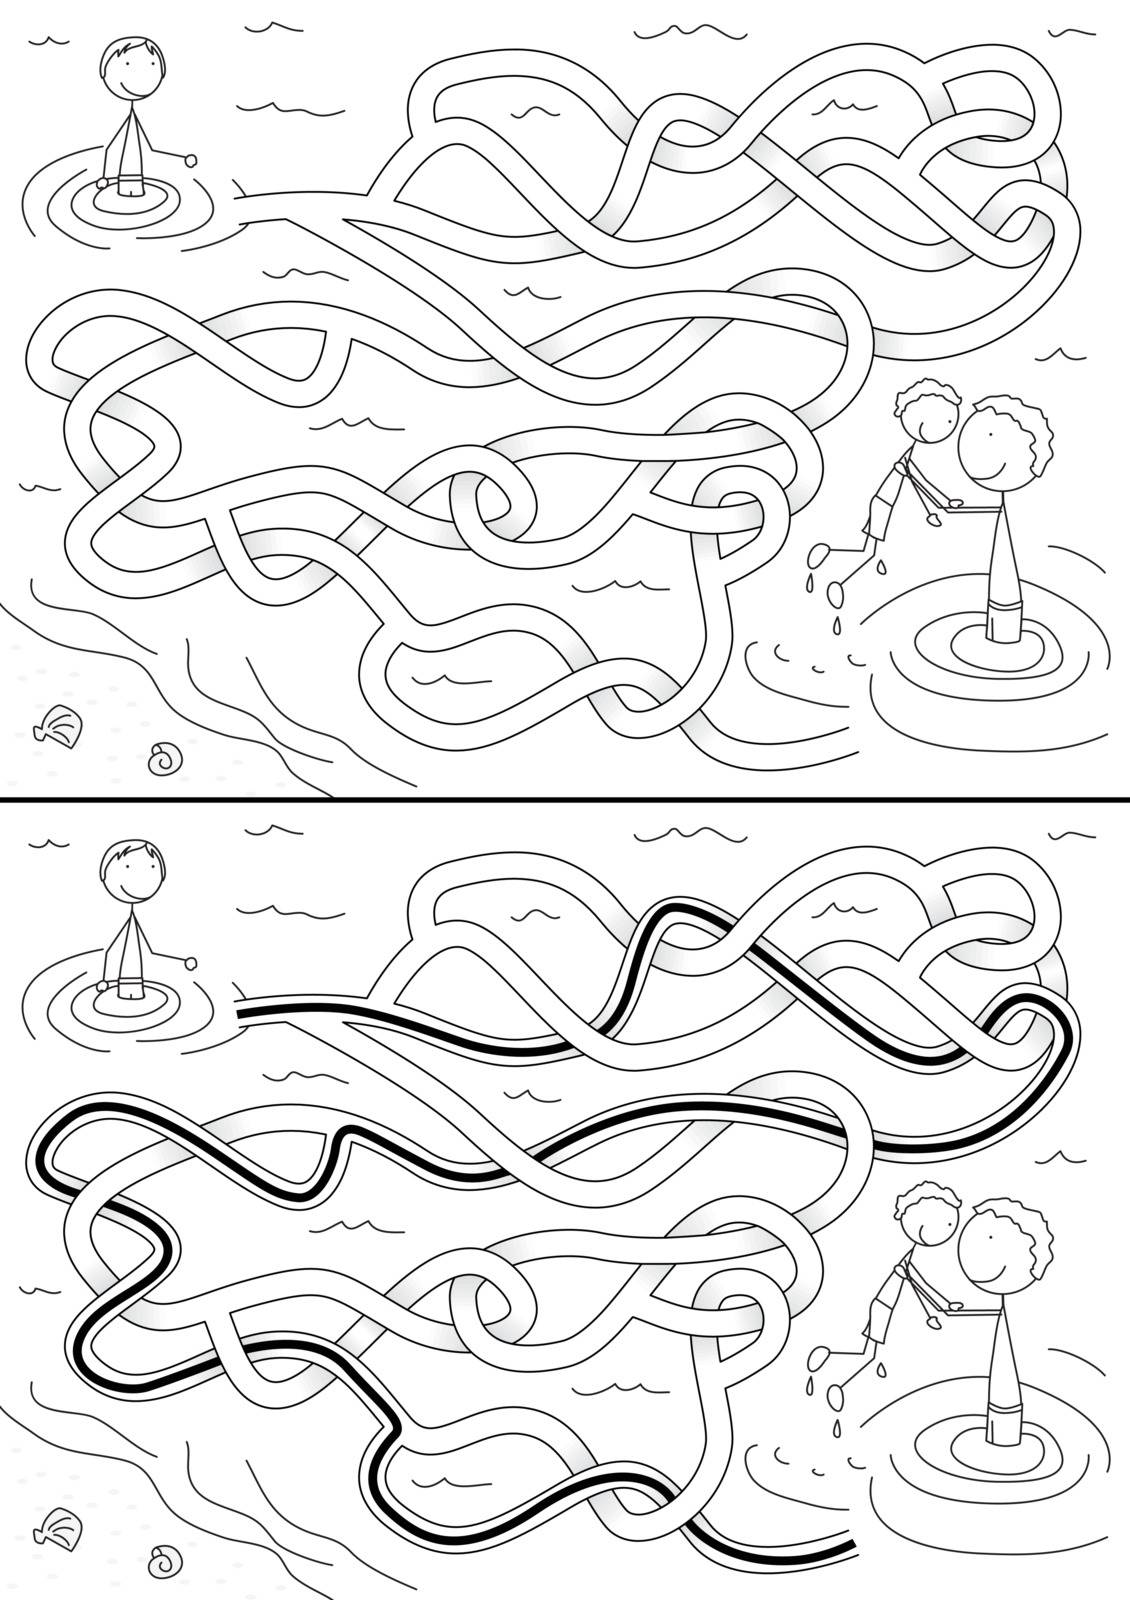 Summer fun maze for kids with a solution in black and white